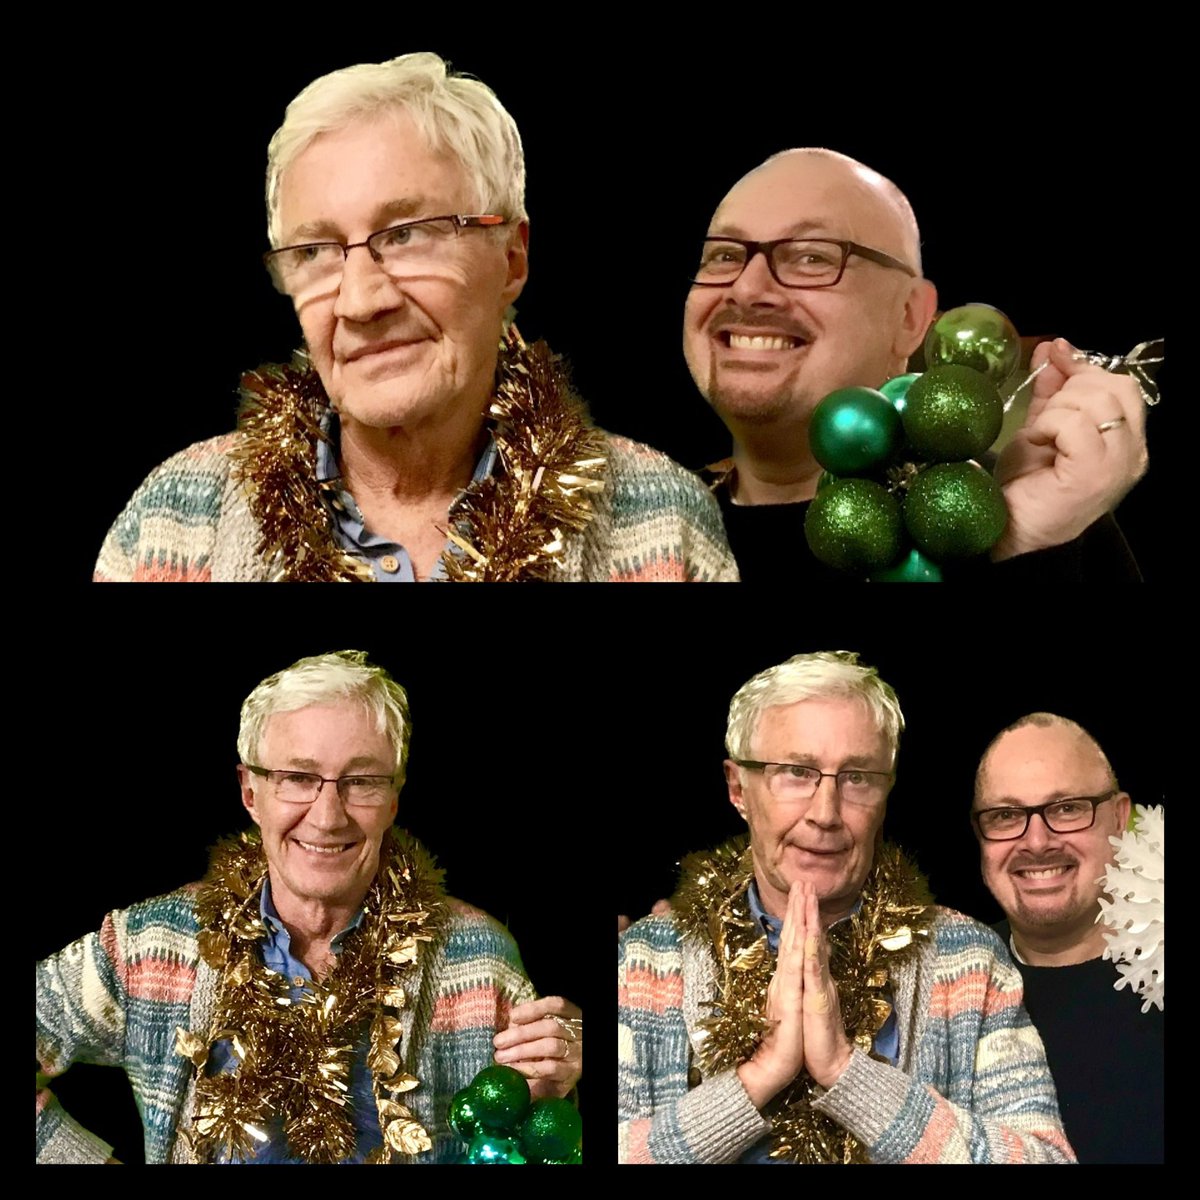 Shall we?

One final time…

Merry Everything everyone

It’s the #TeamPOGradio Christmas Special on Easter Day @BoomRadioUK 🎄🐣

#TellAFriend 

#PaulOGrady it’s truly #NotTheSameWithoutYOU